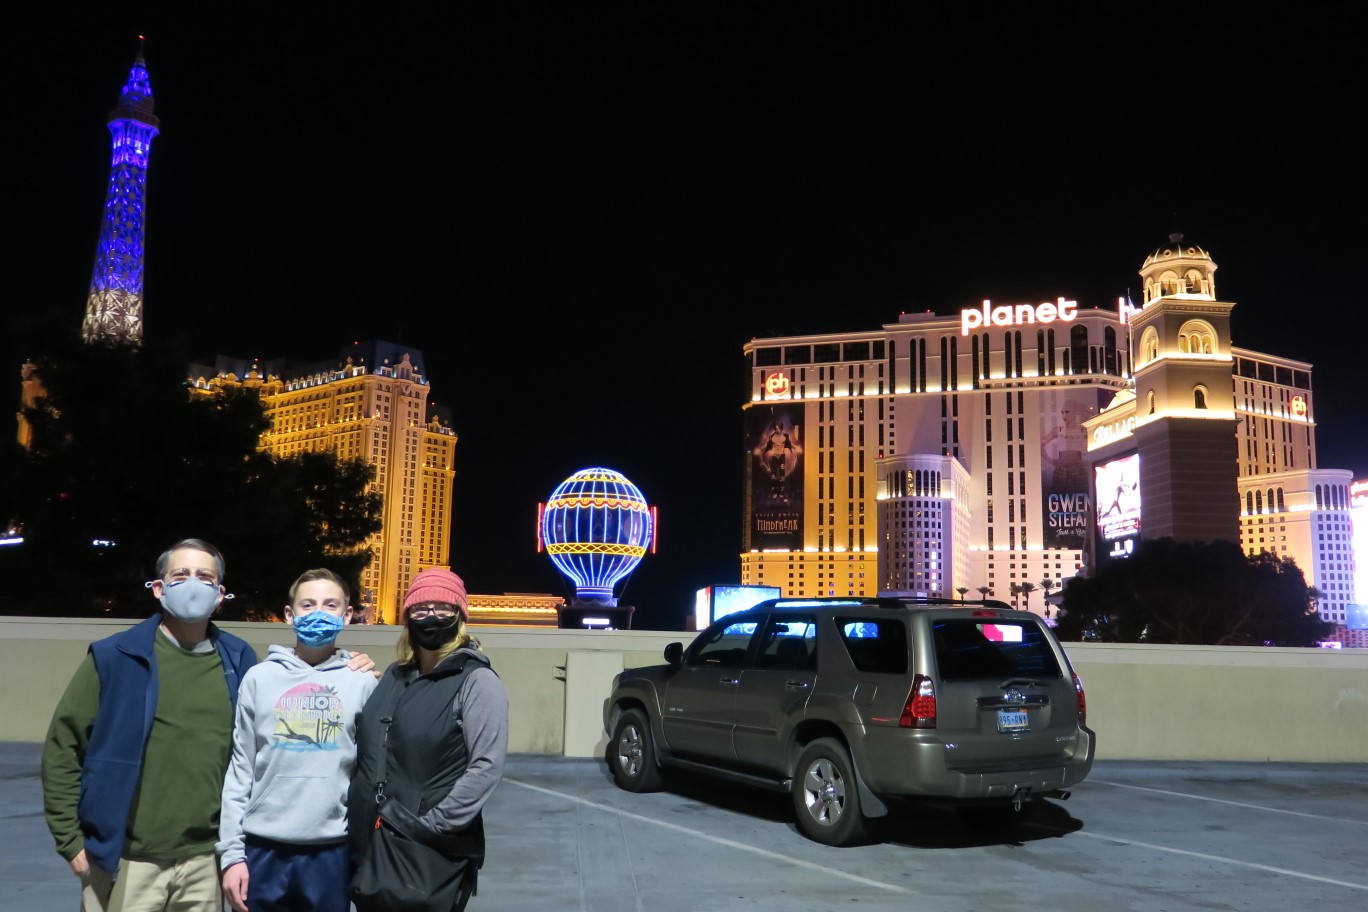 03-family_with_Paris_and_Planet_Hollywood_in_background-from_top_of_Bellagio_parking_garage